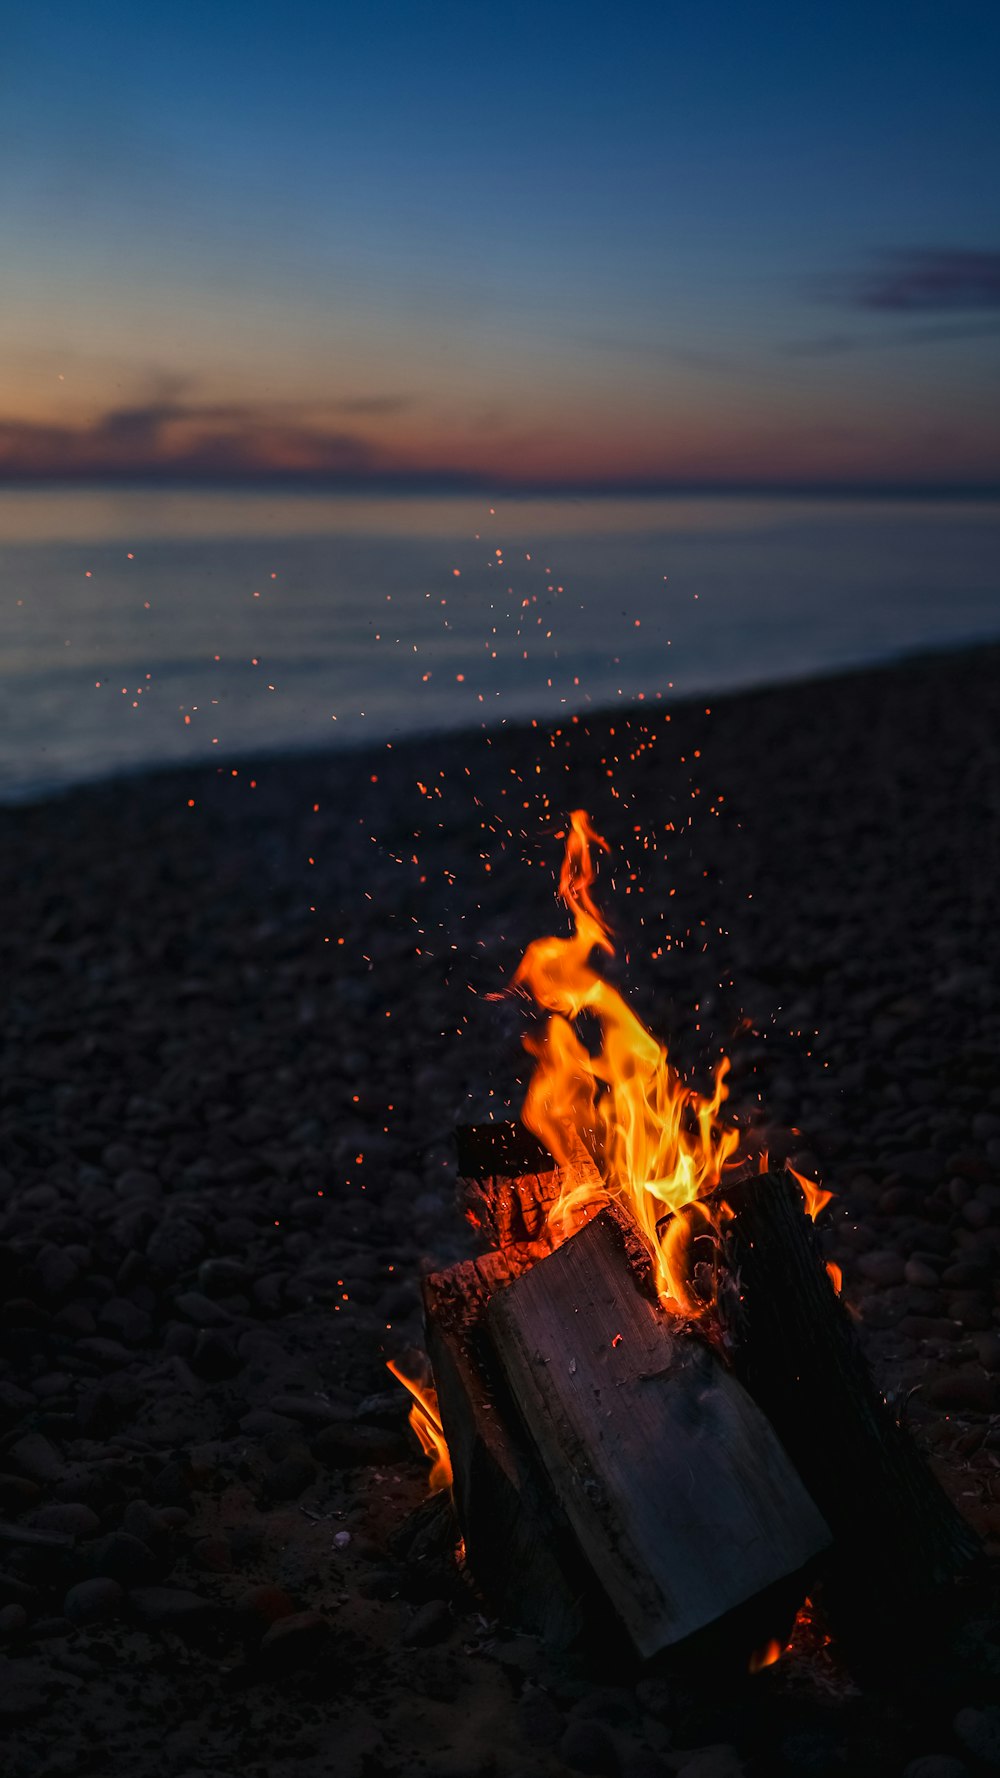 fire on brown sand near body of water during sunset